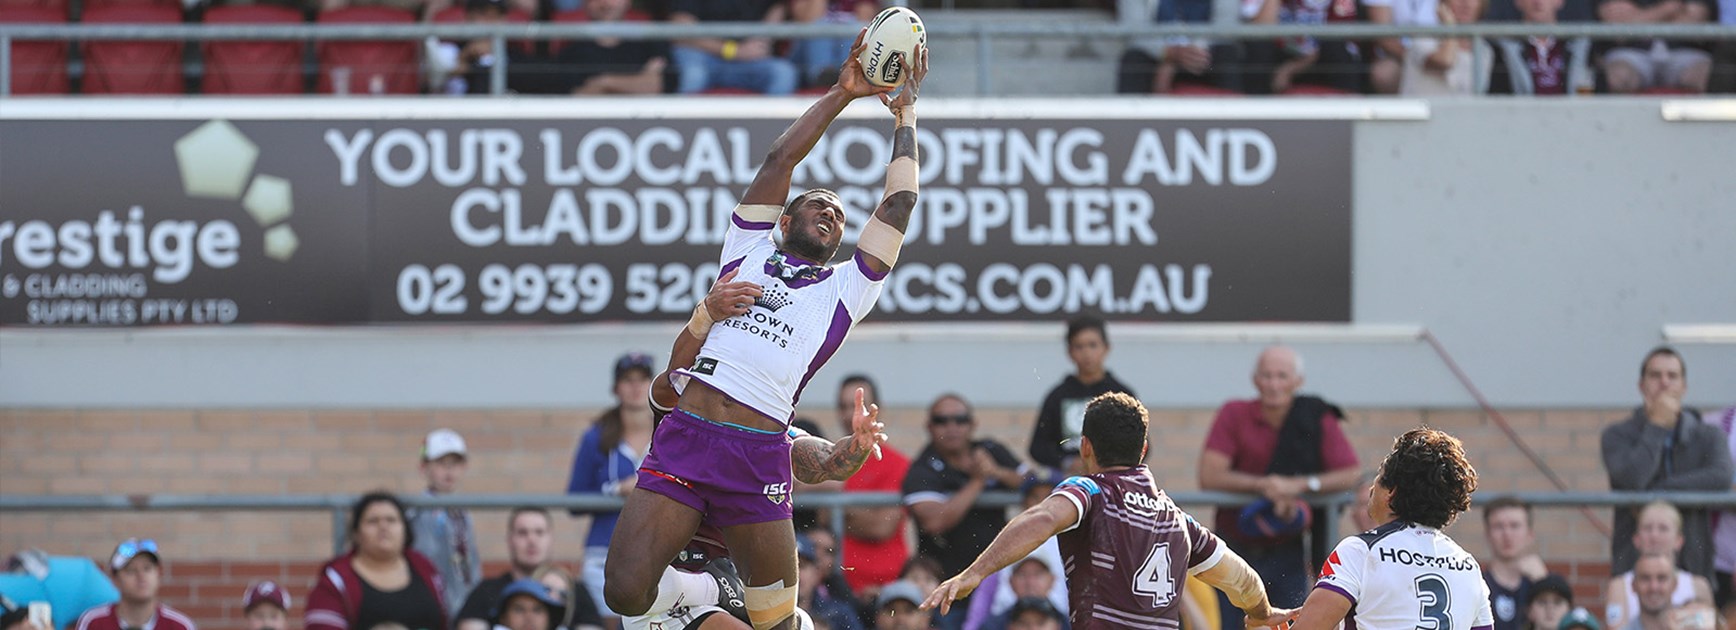 Suliasi Vunivalu flies above the pack to score a spectacular try for Melbourne against Manly in Round 7.